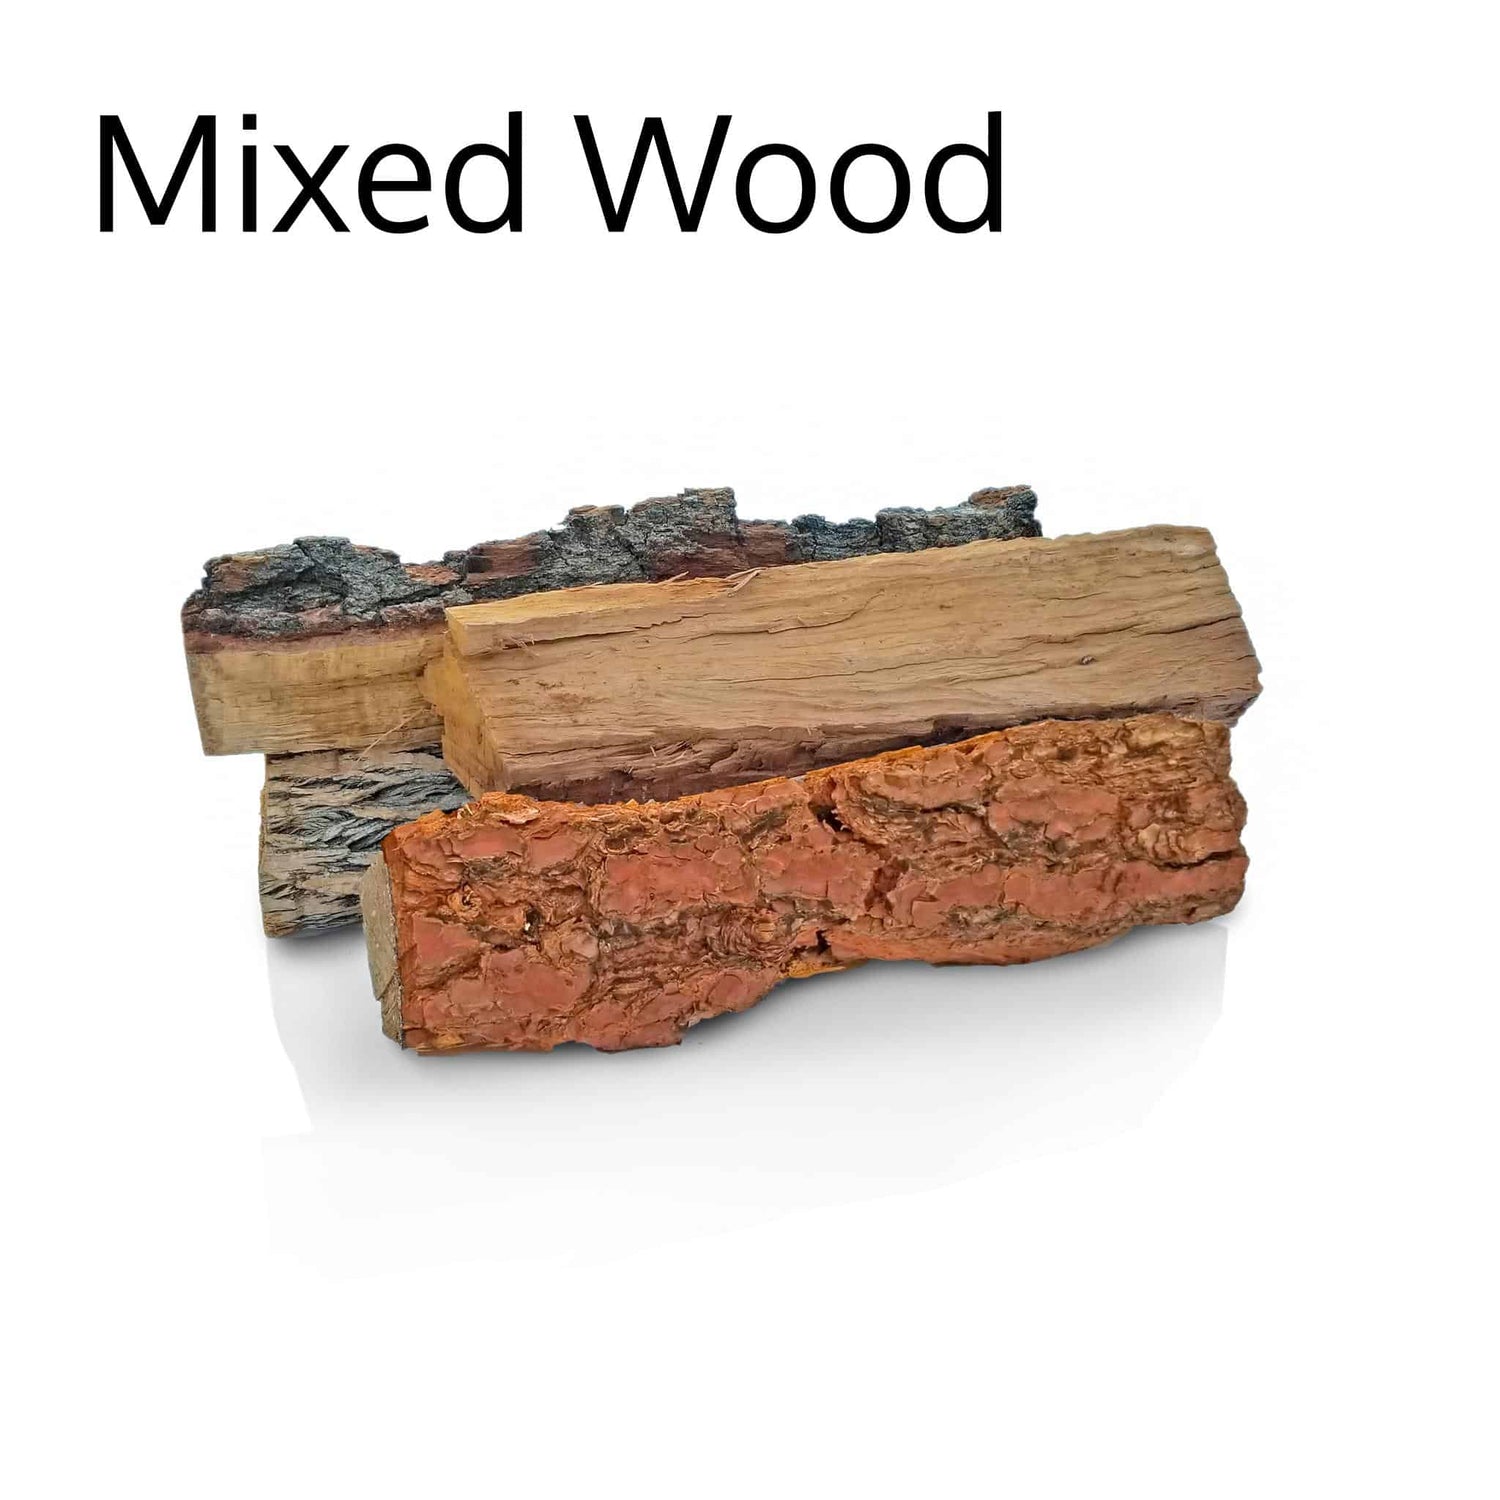 Premium mixed firewood (hardwood & softwood), seasoned, very low moisture (guaranteed), free local delivery, carbon-neutral and from sustainable sources.